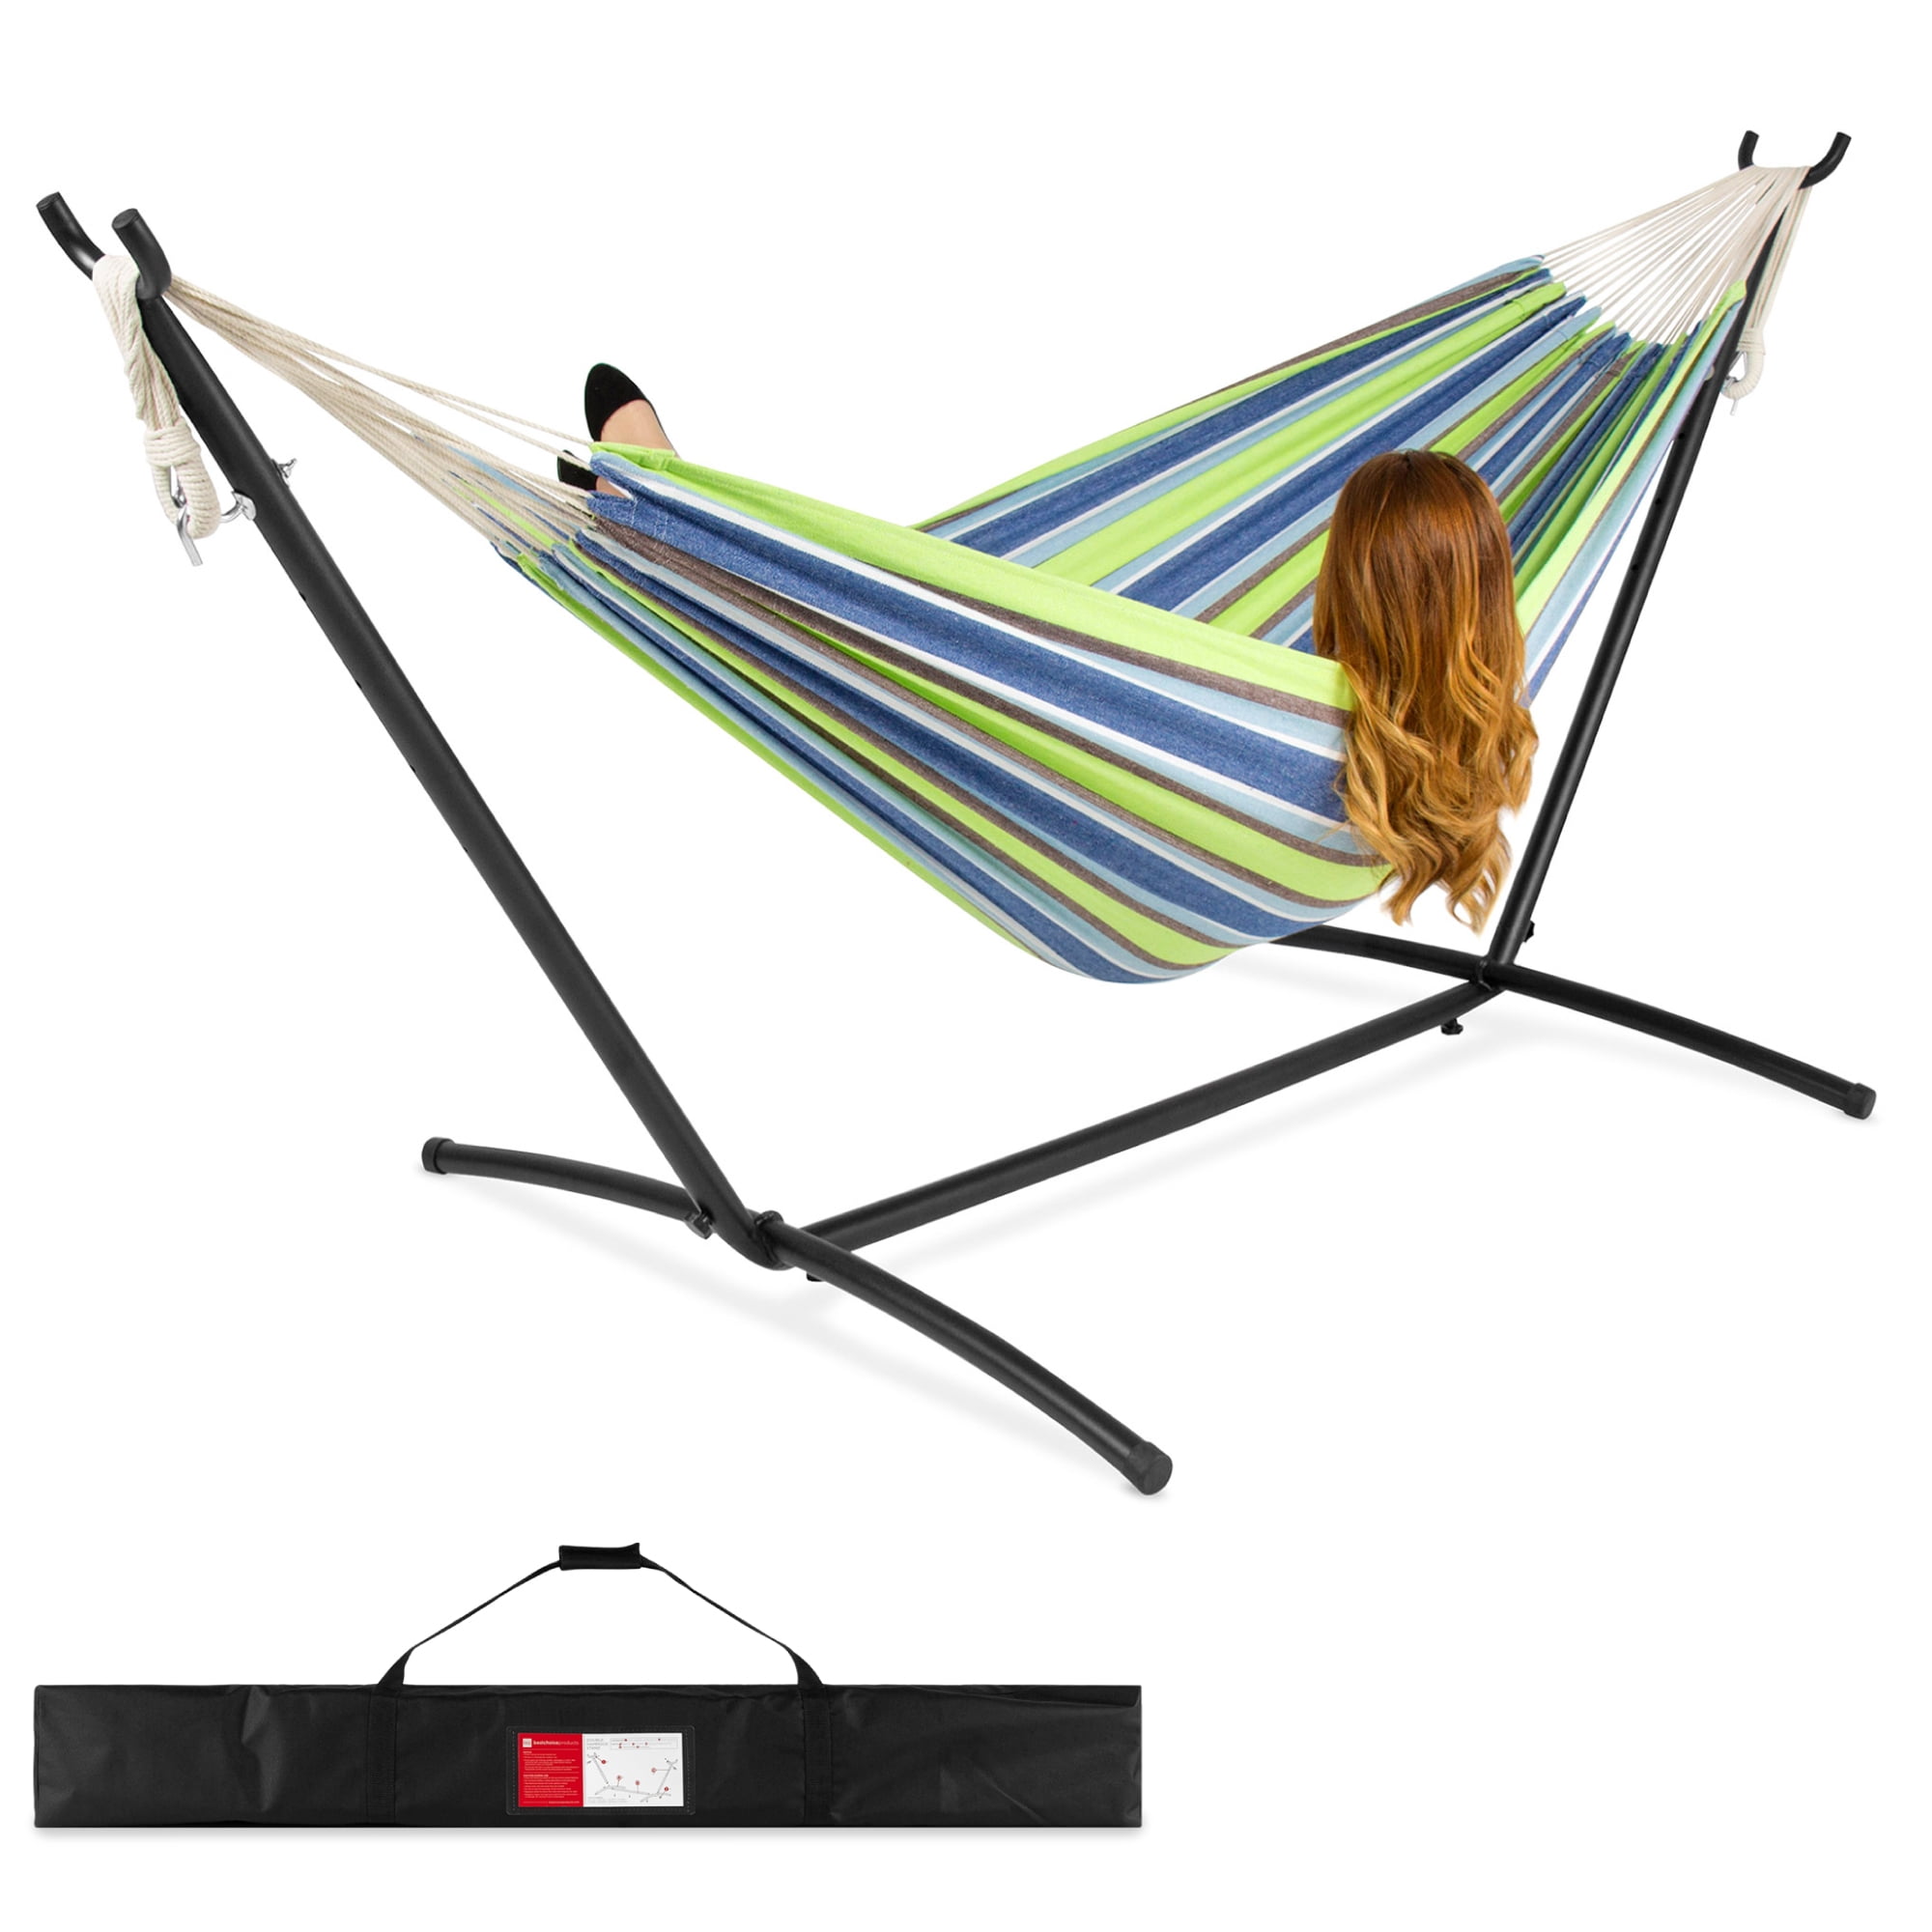 72"x39" Cotton Fabric Canvas Hanging Bed Hammocks with Small Pillow for Camping 